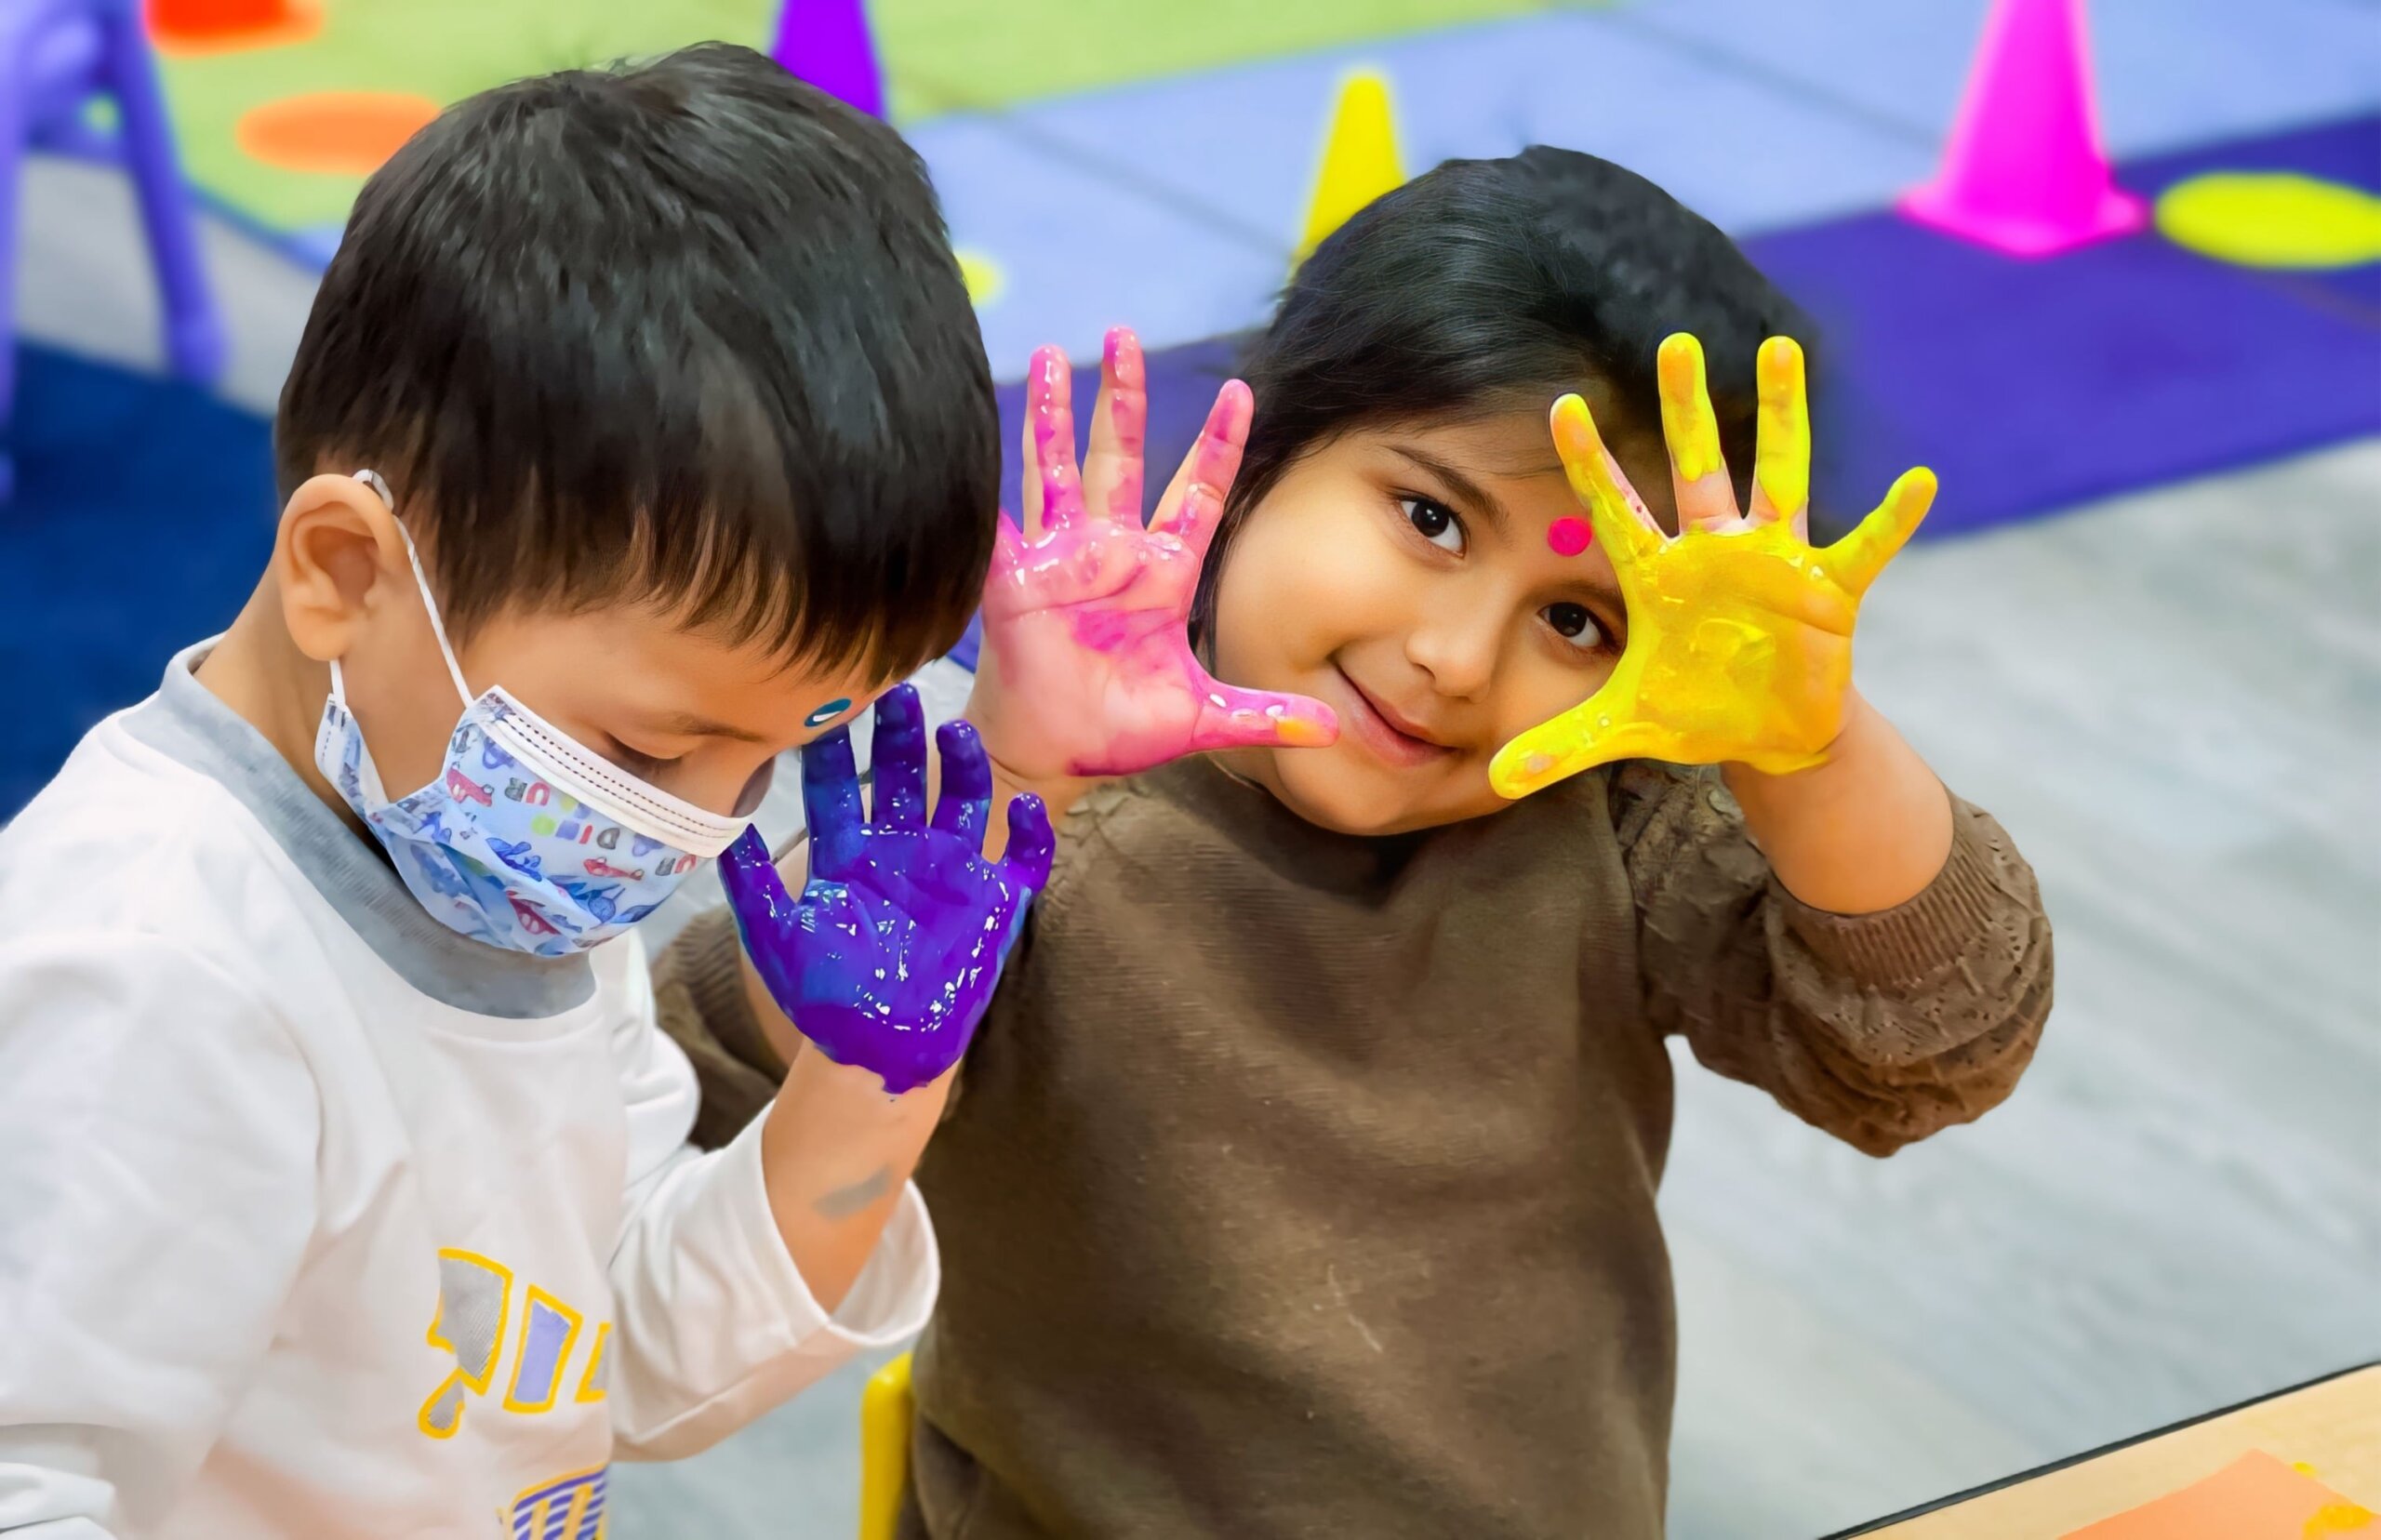 Two kids showing their colorful painted hands during Holi celebrations